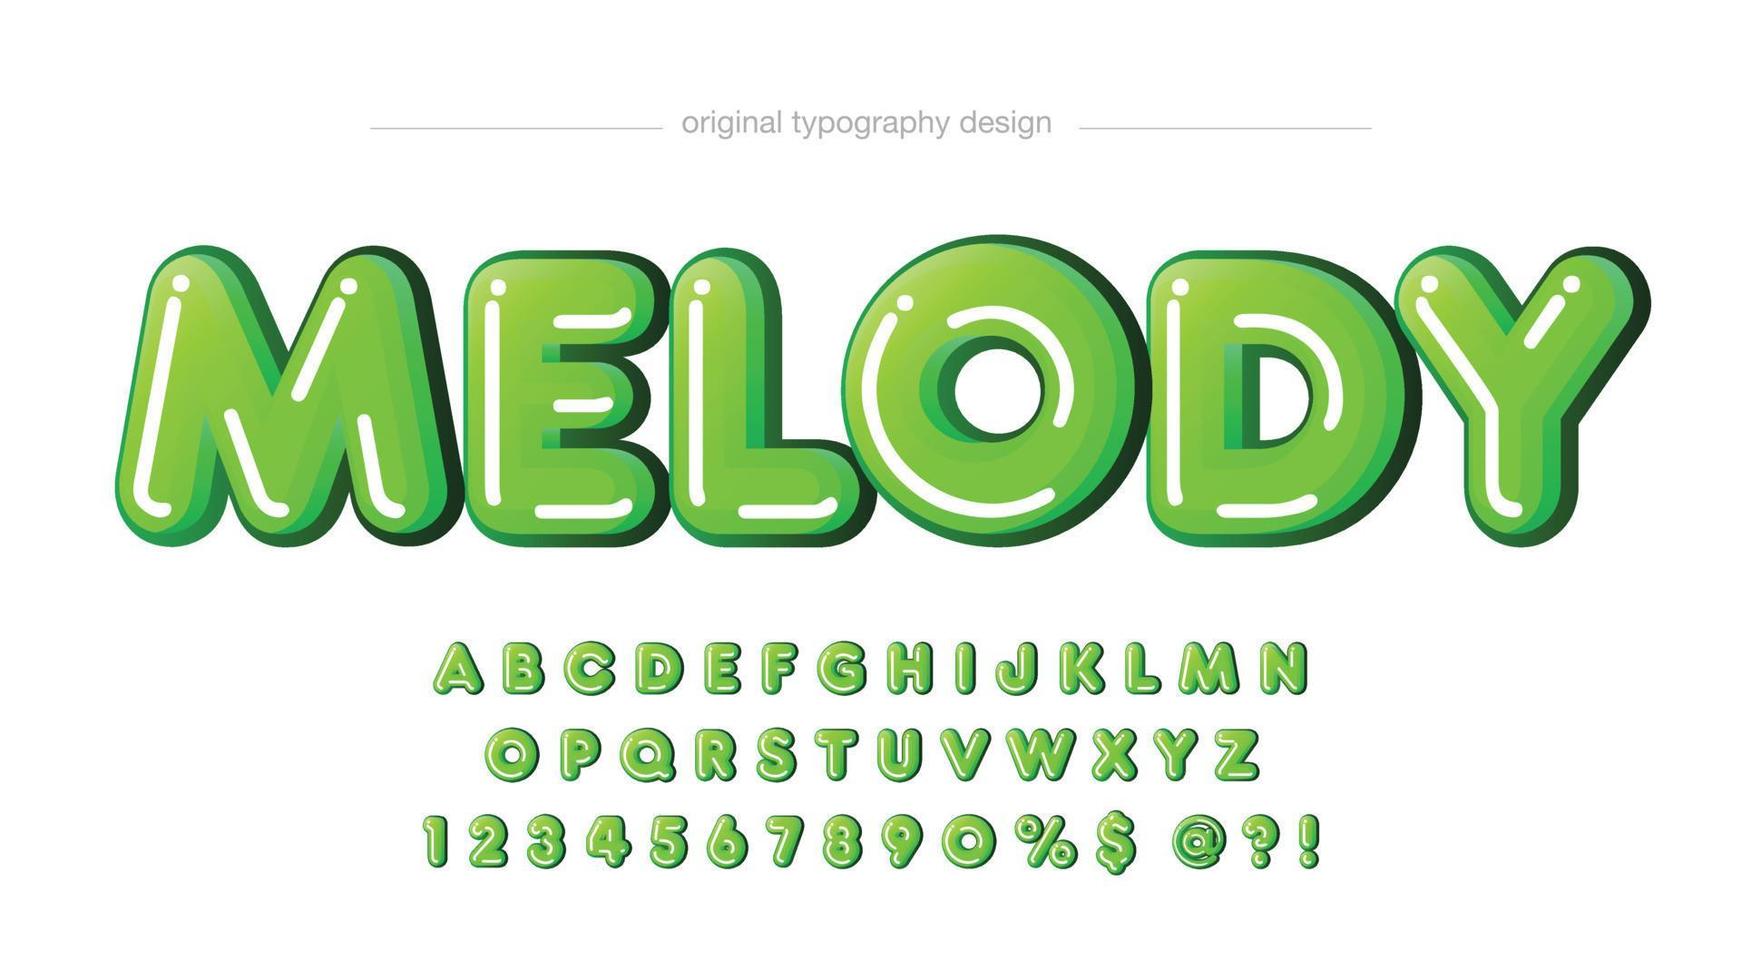 rounded green 3d cartoon font vector